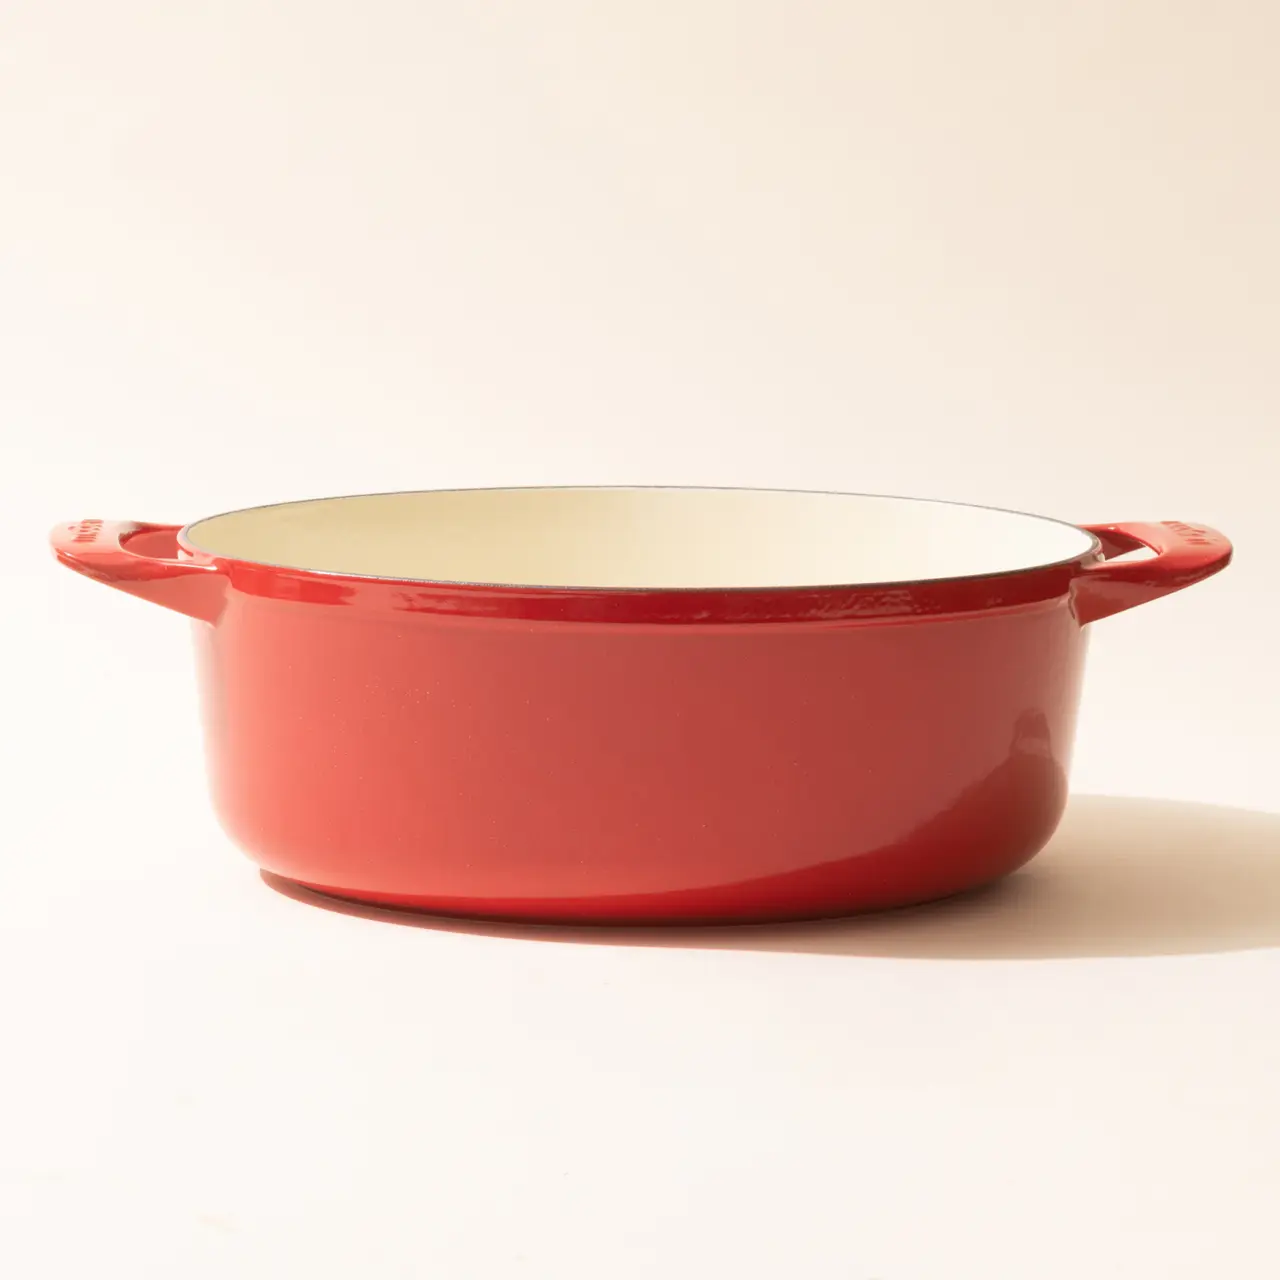 oval dutch oven made in red no lid